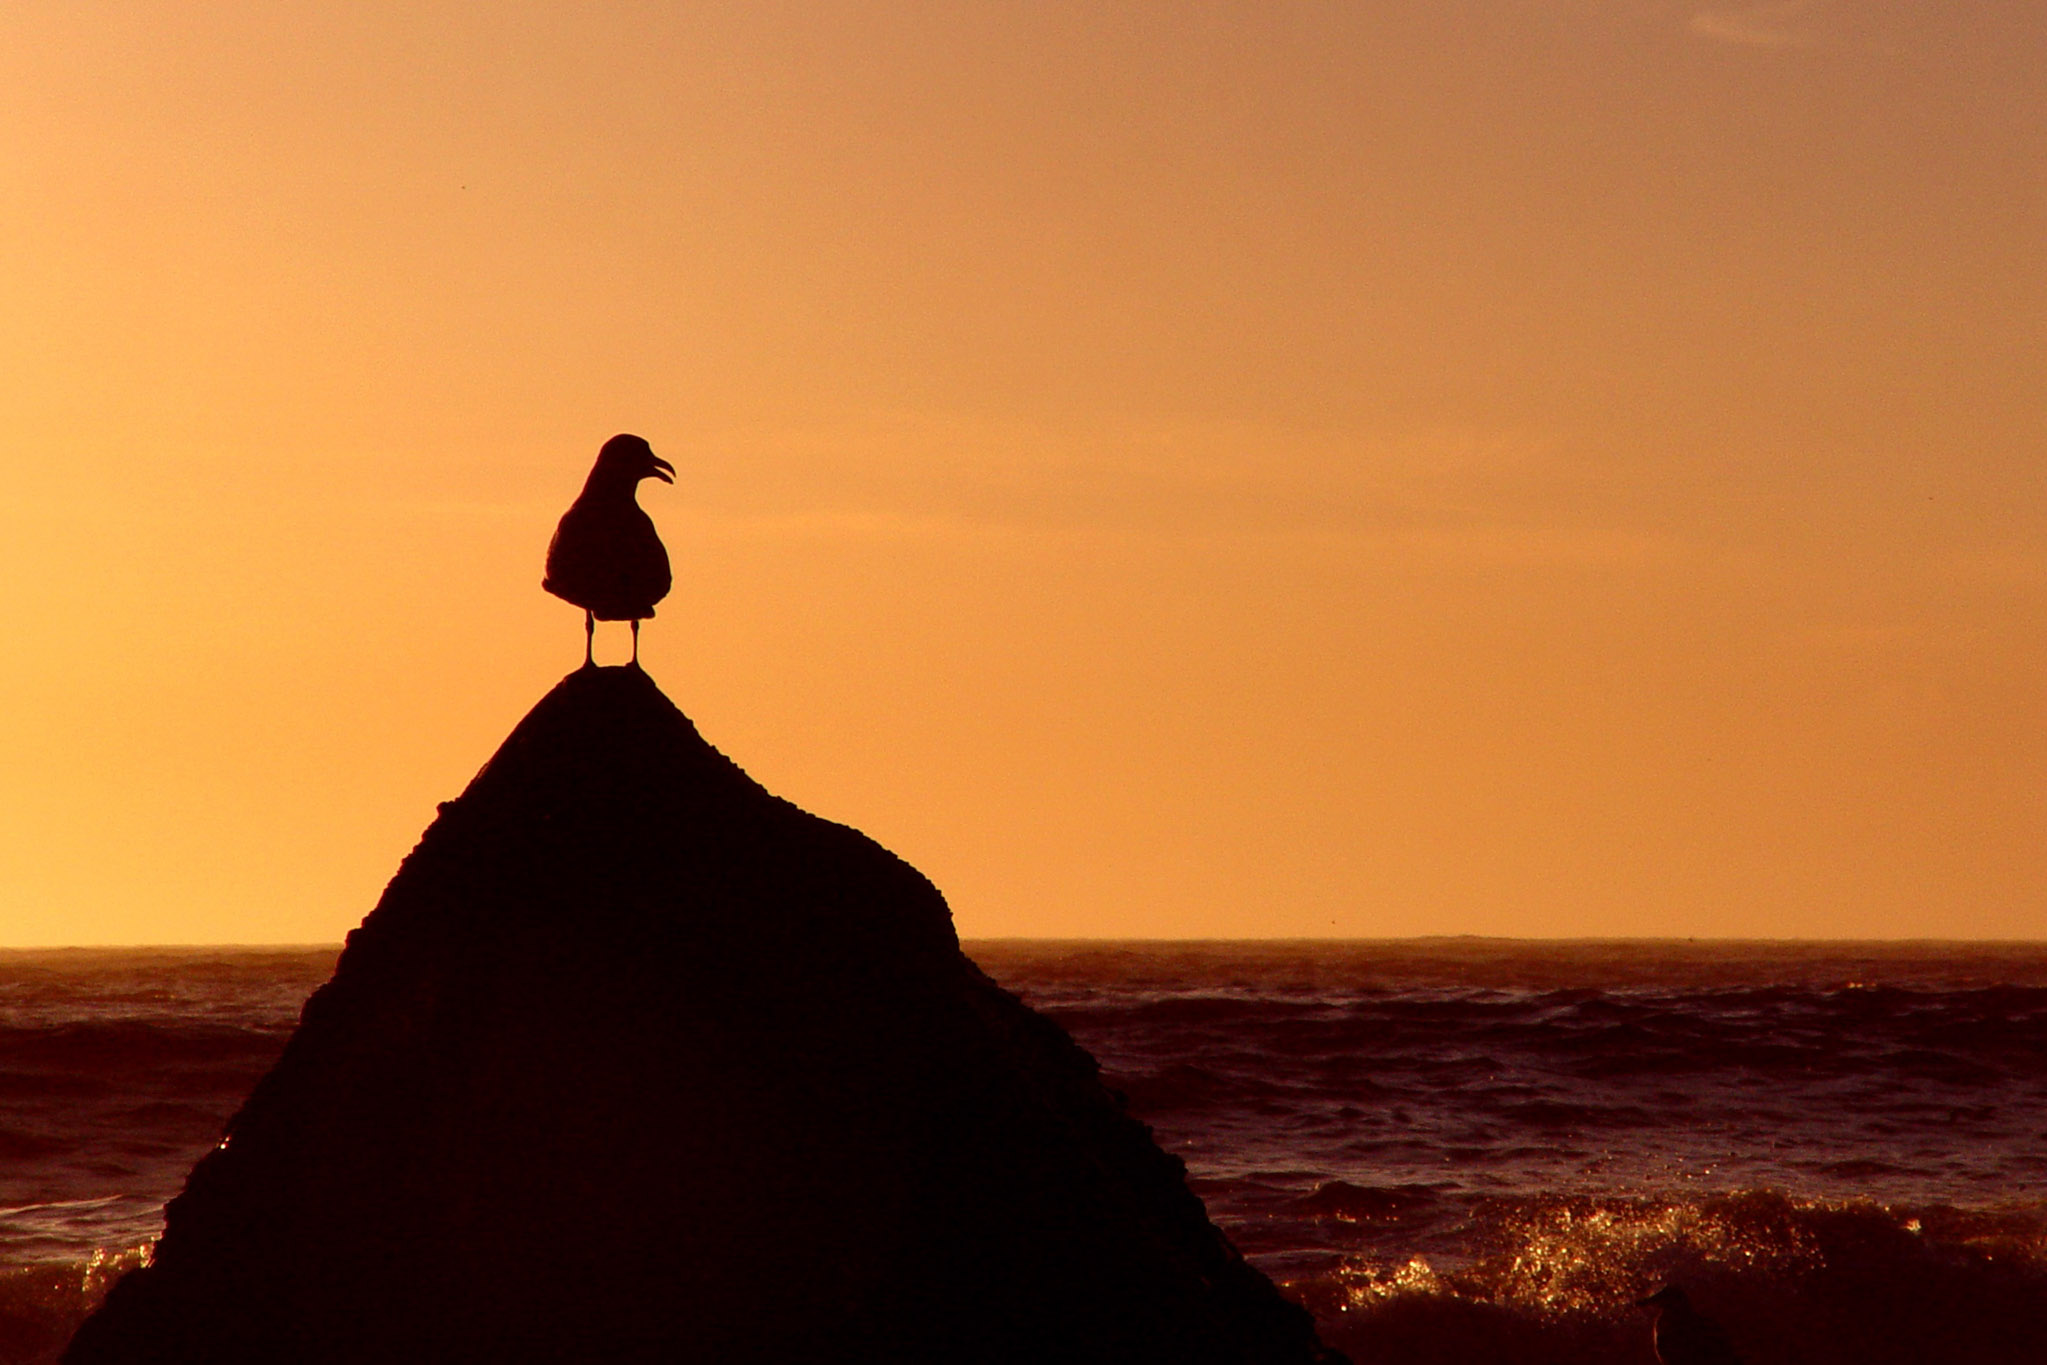 Bird perched in the sunset